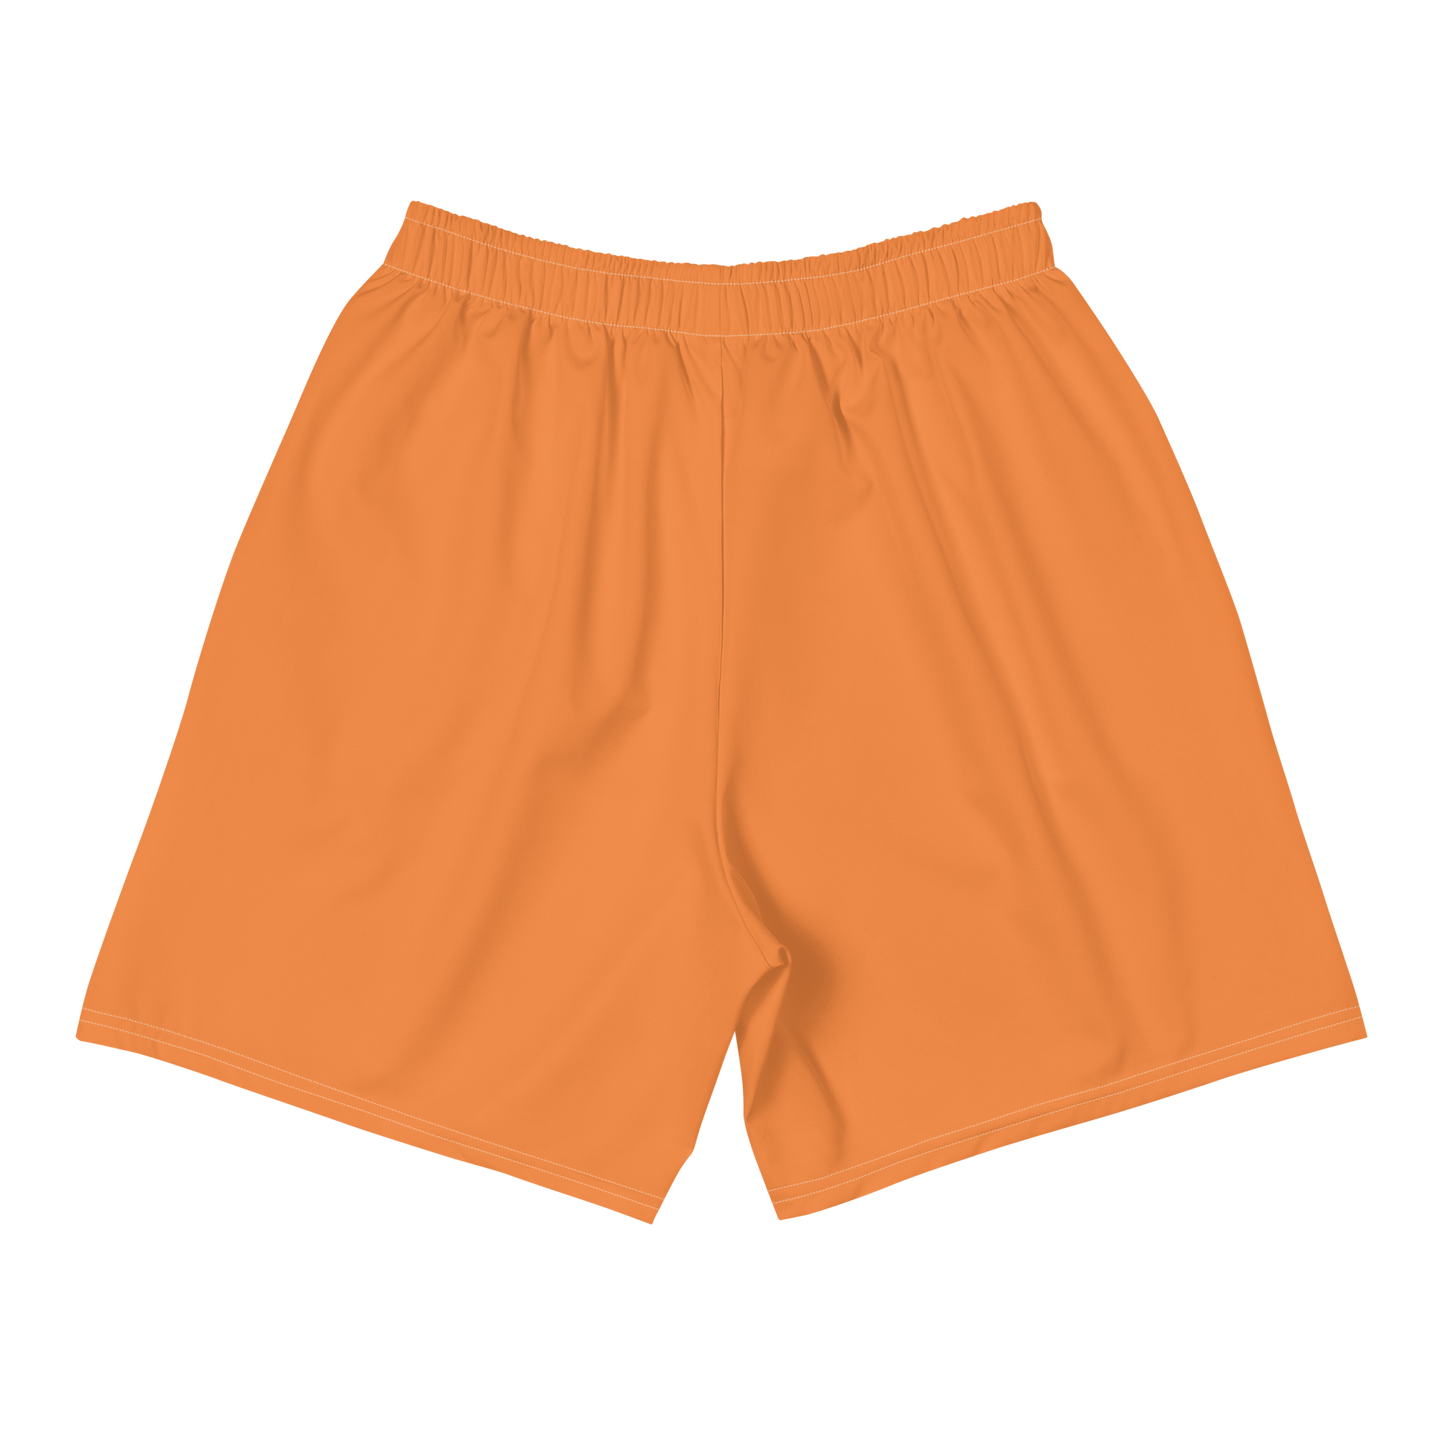 RJ PERRY GAMEDAY ATHLETIC SHORTS